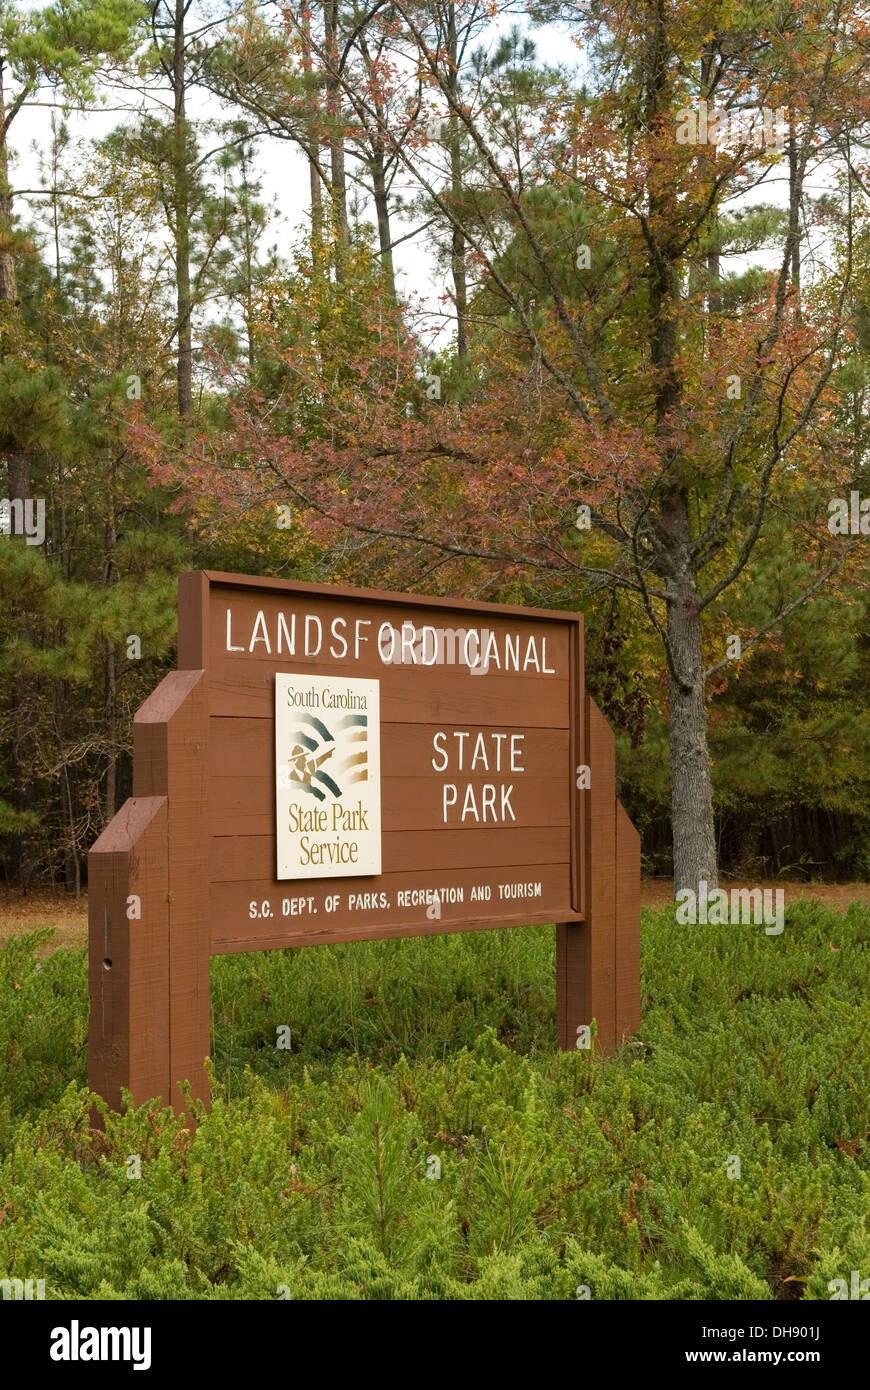 Landsford Canal State Park sign Fort Lawn South Carolina USA. Stock Photo